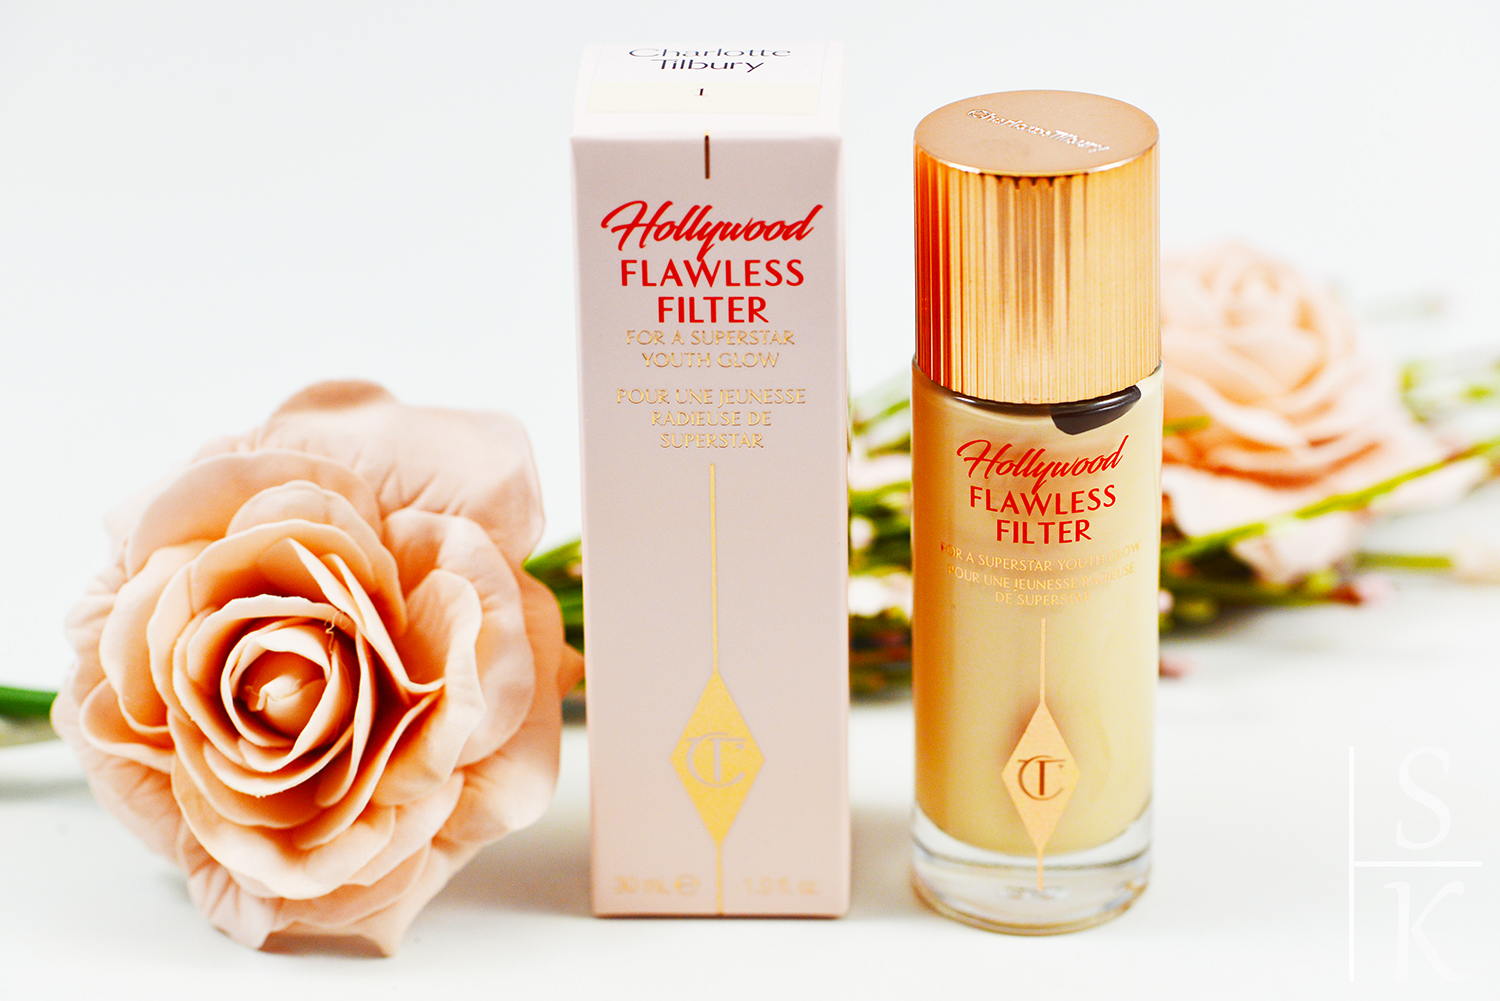 Charlotte Tilbury - Hollywood Flawless Filter, Review und Swatches @Horizont-Blog